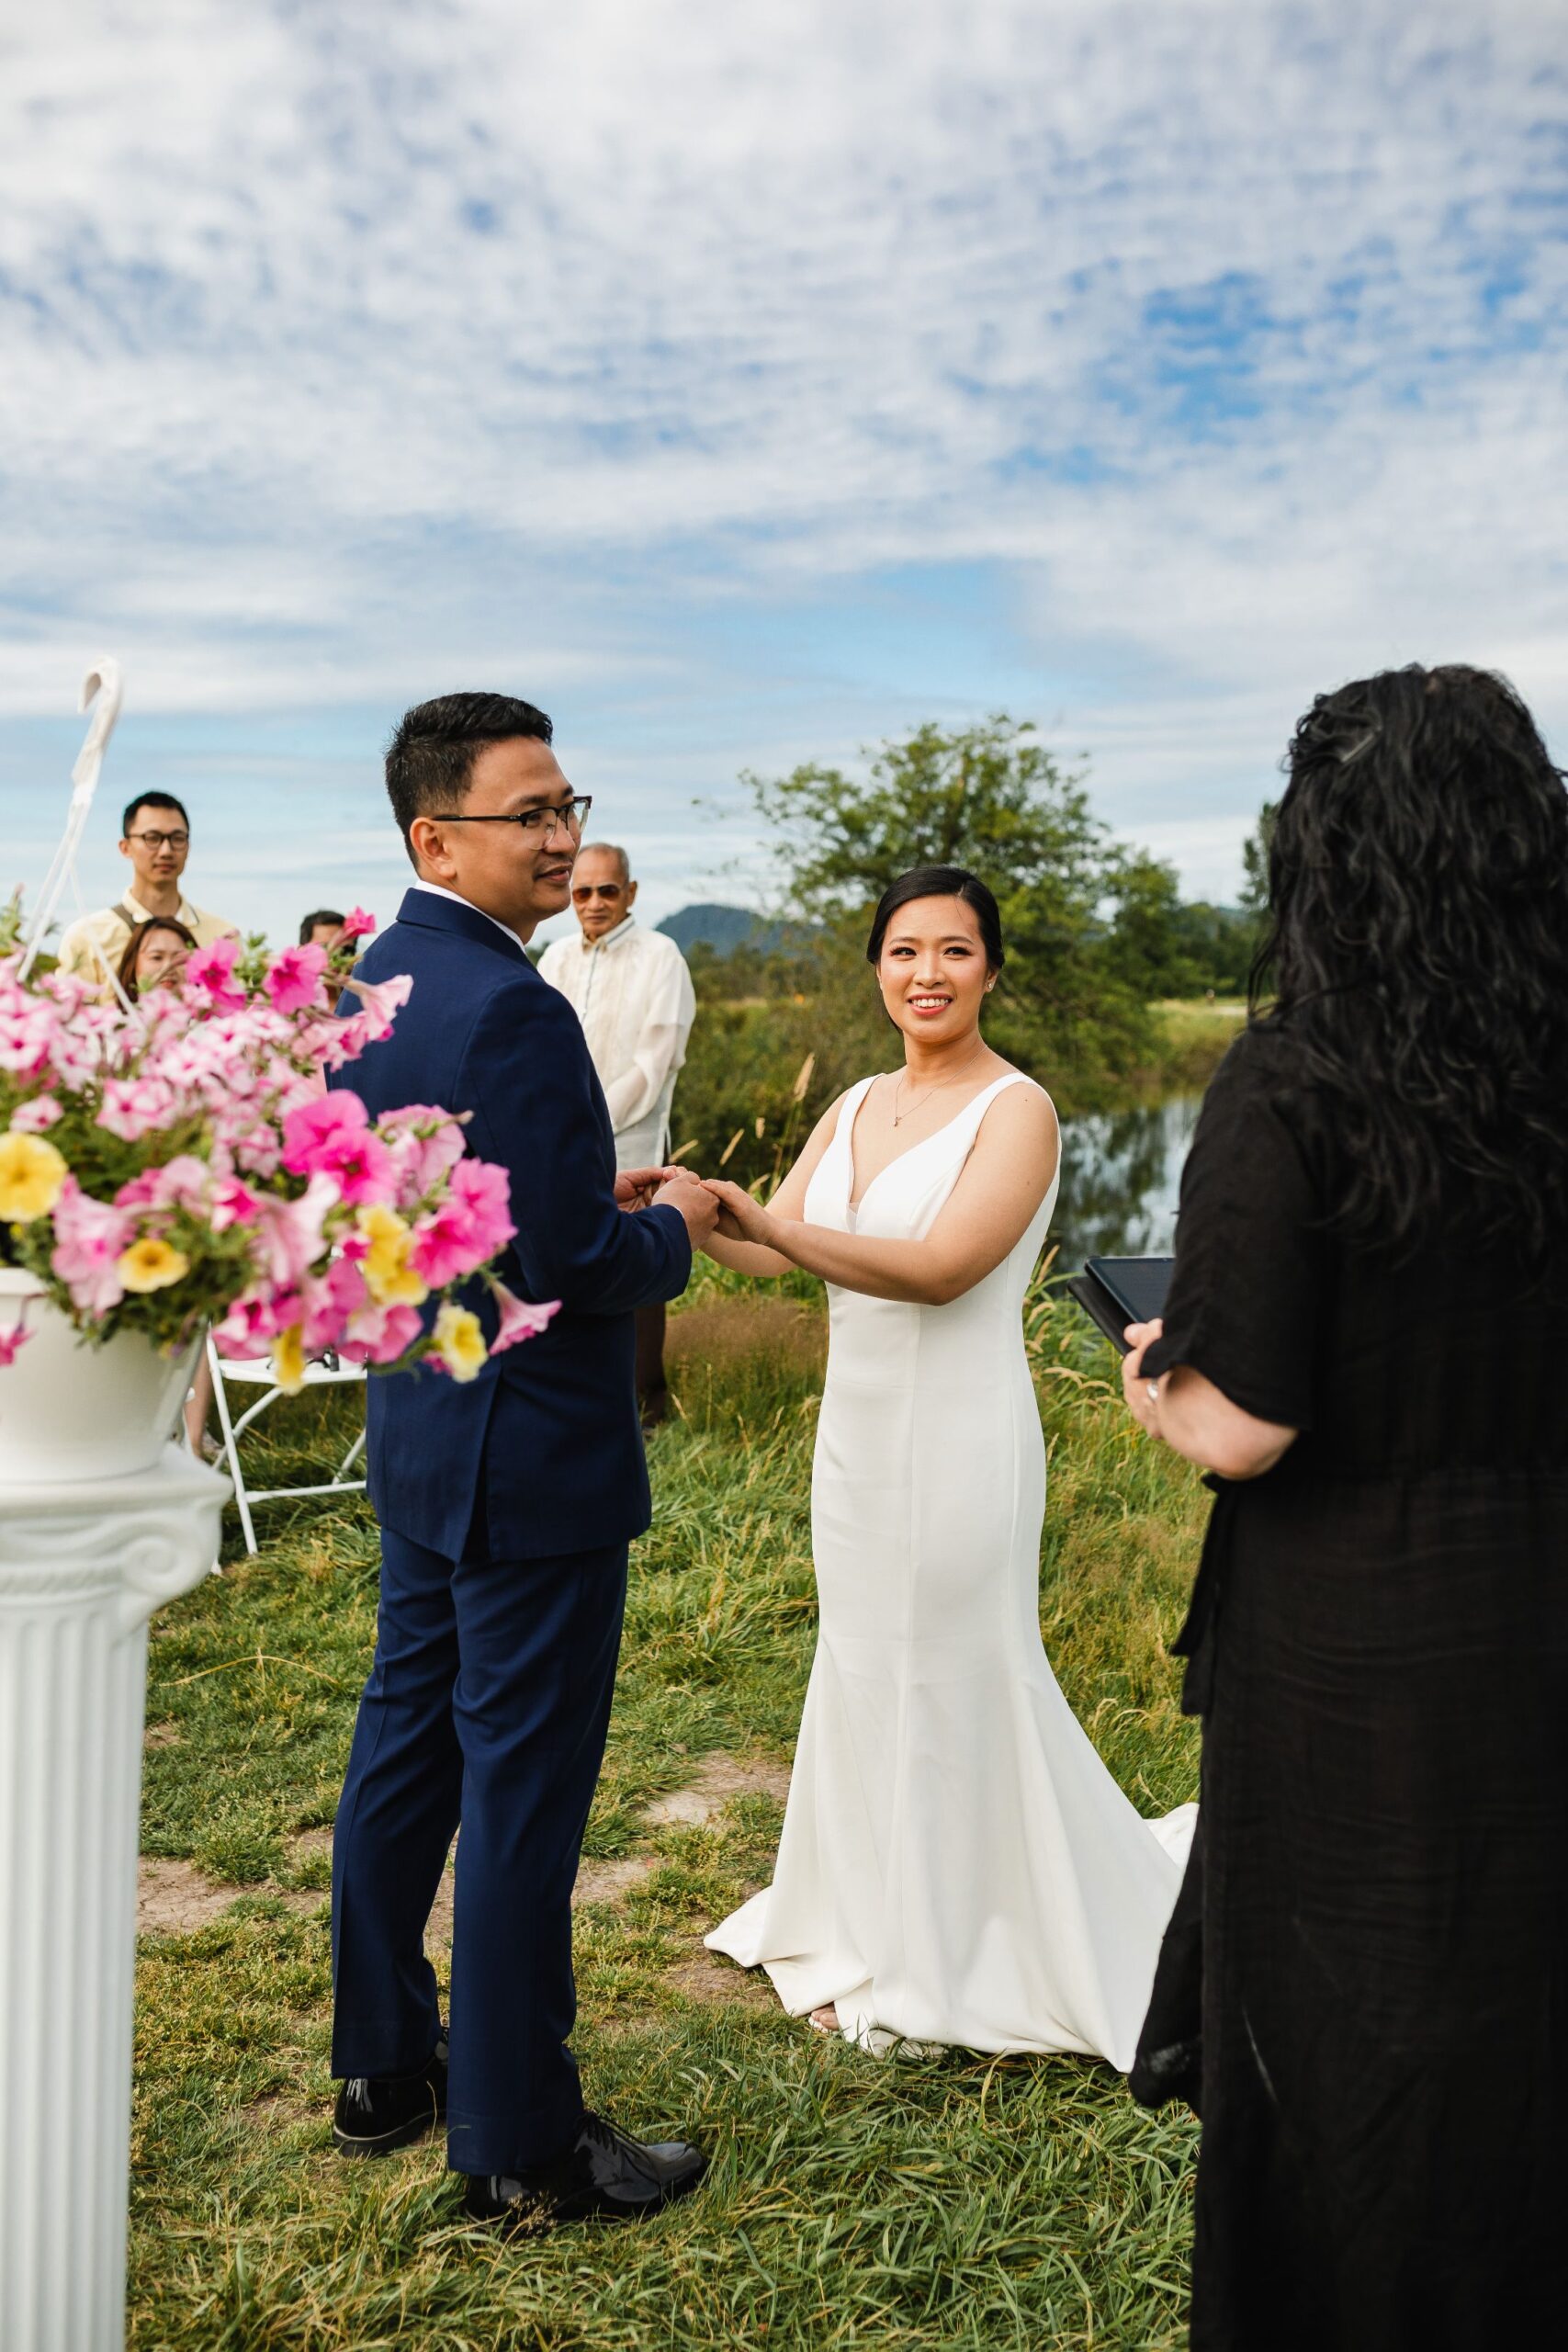 outdoor garden wedding with young hip and married wedding officiants